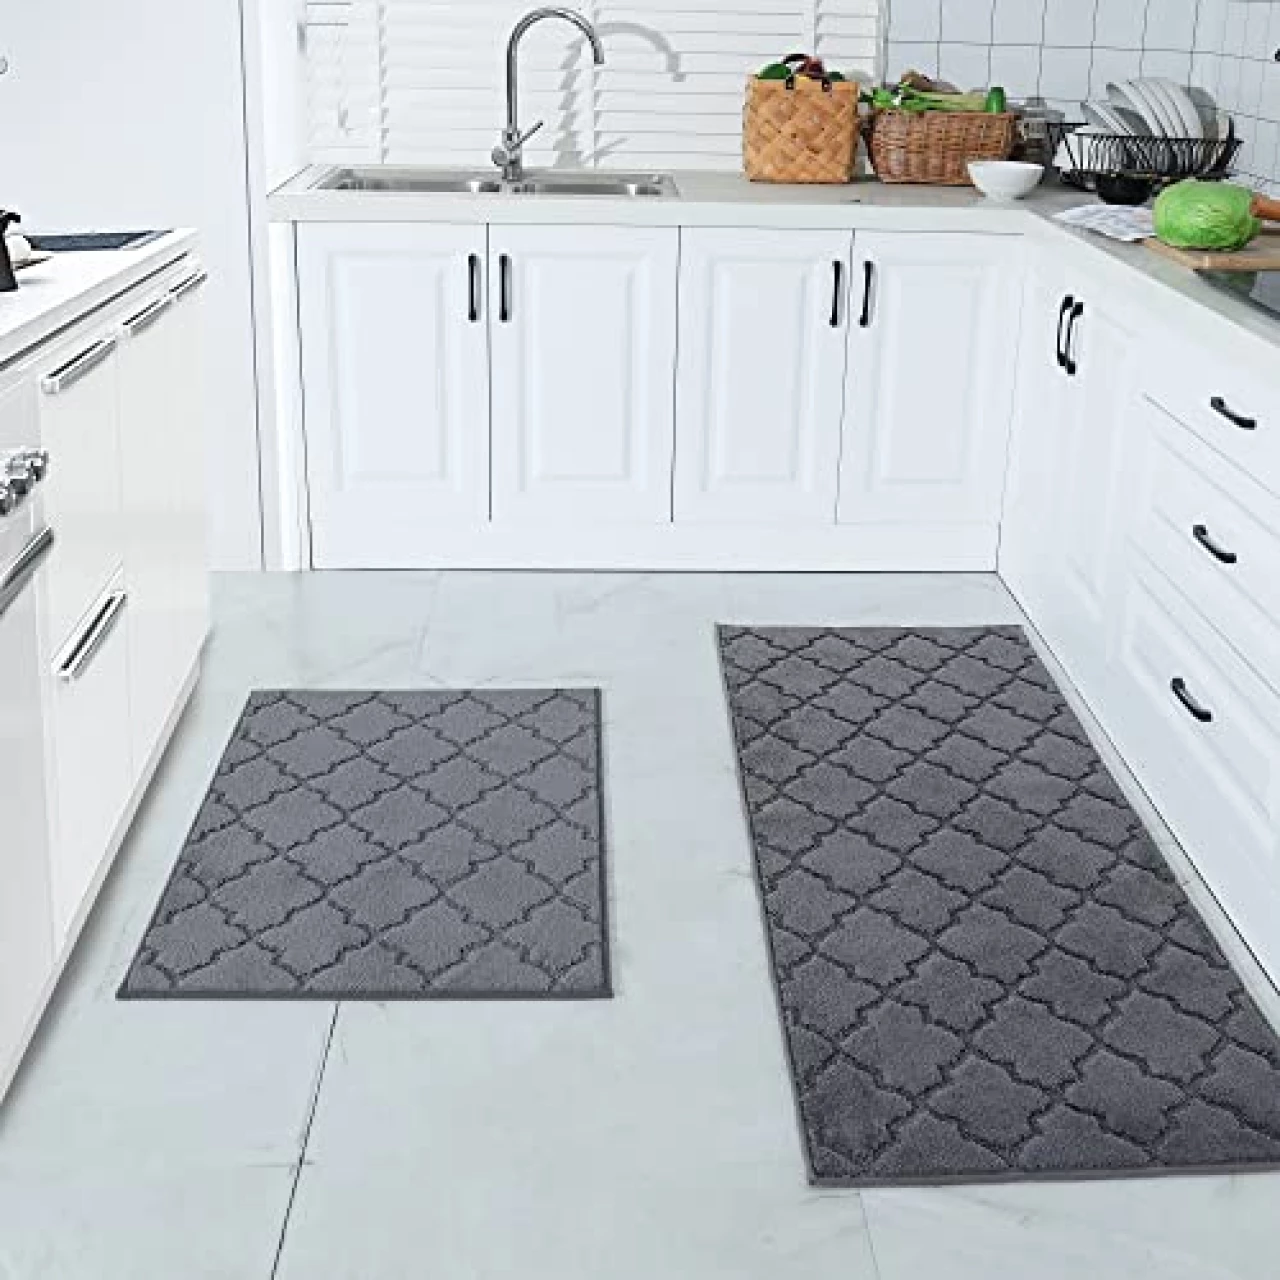 COSY HOMEER Soft Kitchen Rugs [2 PCS] for in Front of Sink Super Absorbent Kitchen Floor Mats and Mats 24x35 Inch/24X60 Non-Skid Kitchen Mat Standing Mat Washable,Polyester,Grey